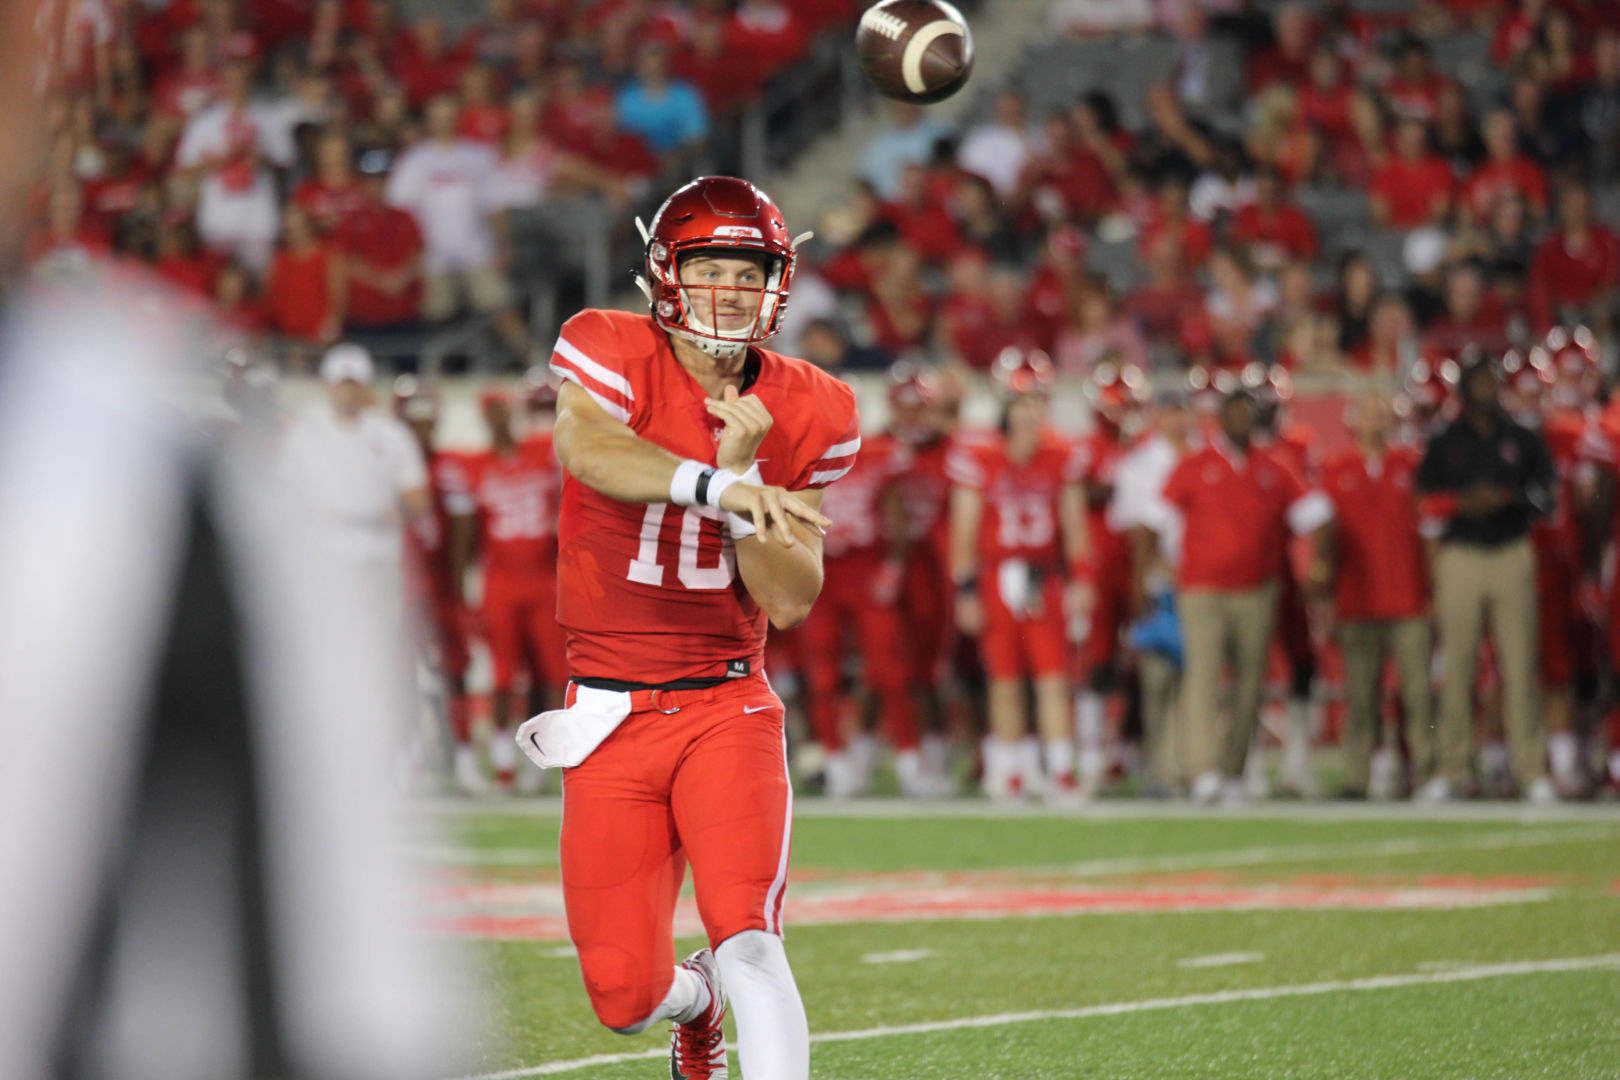 Former UH quarterback and current Carolina starter Kyle Allen has thrown for 13 touchdowns and over 2,000 yards in 2019 and will face off against the Washington Redskins with his Panthers on Sunday. | File photo